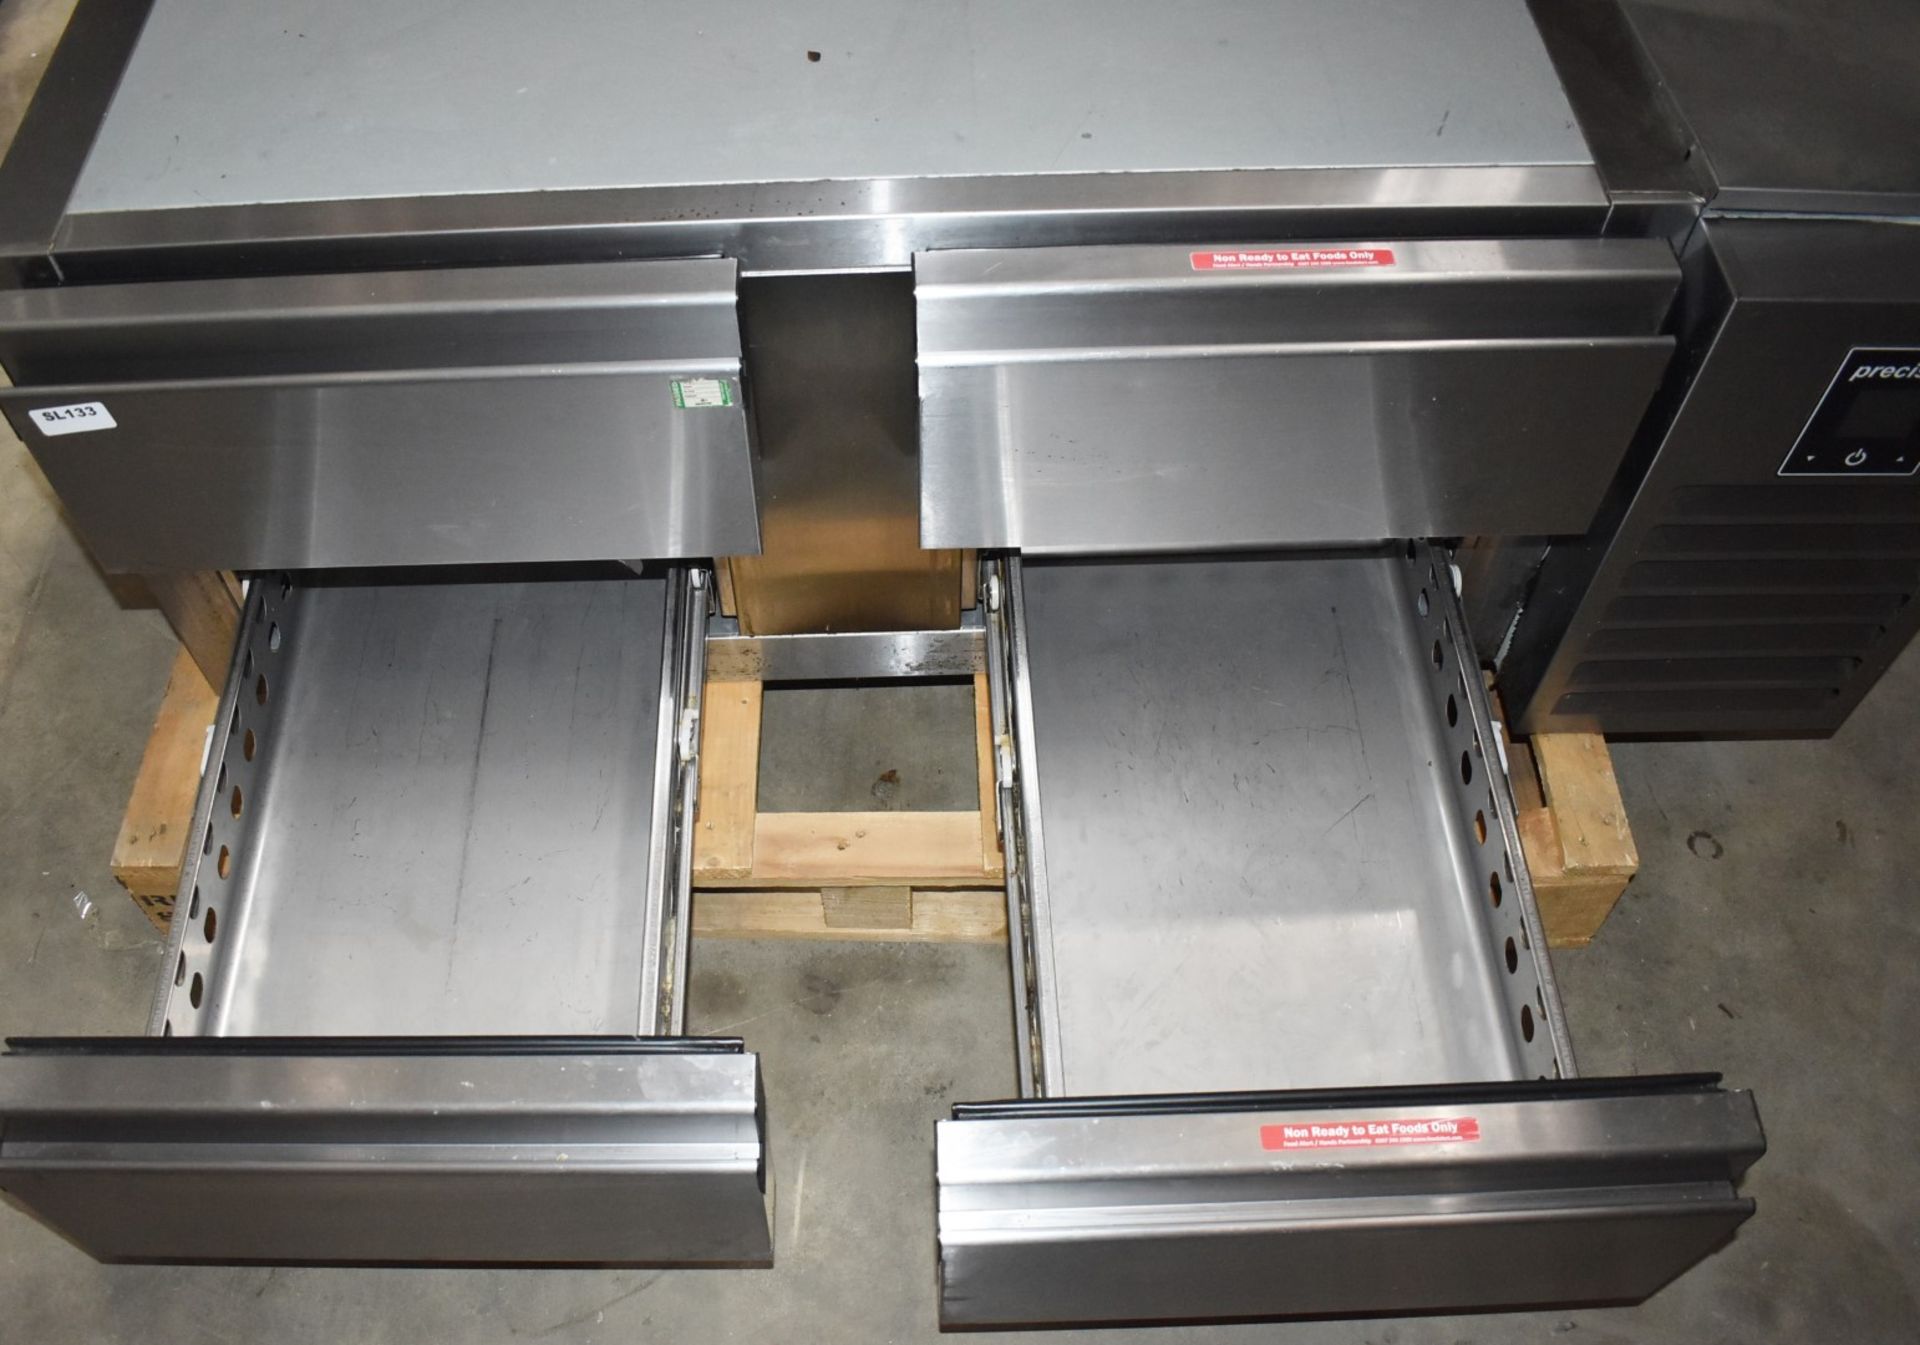 1 x Precision HUBC 411 Stainless Steel Under Broiler Counter Refrigerator - Recently Removed From - Image 7 of 9